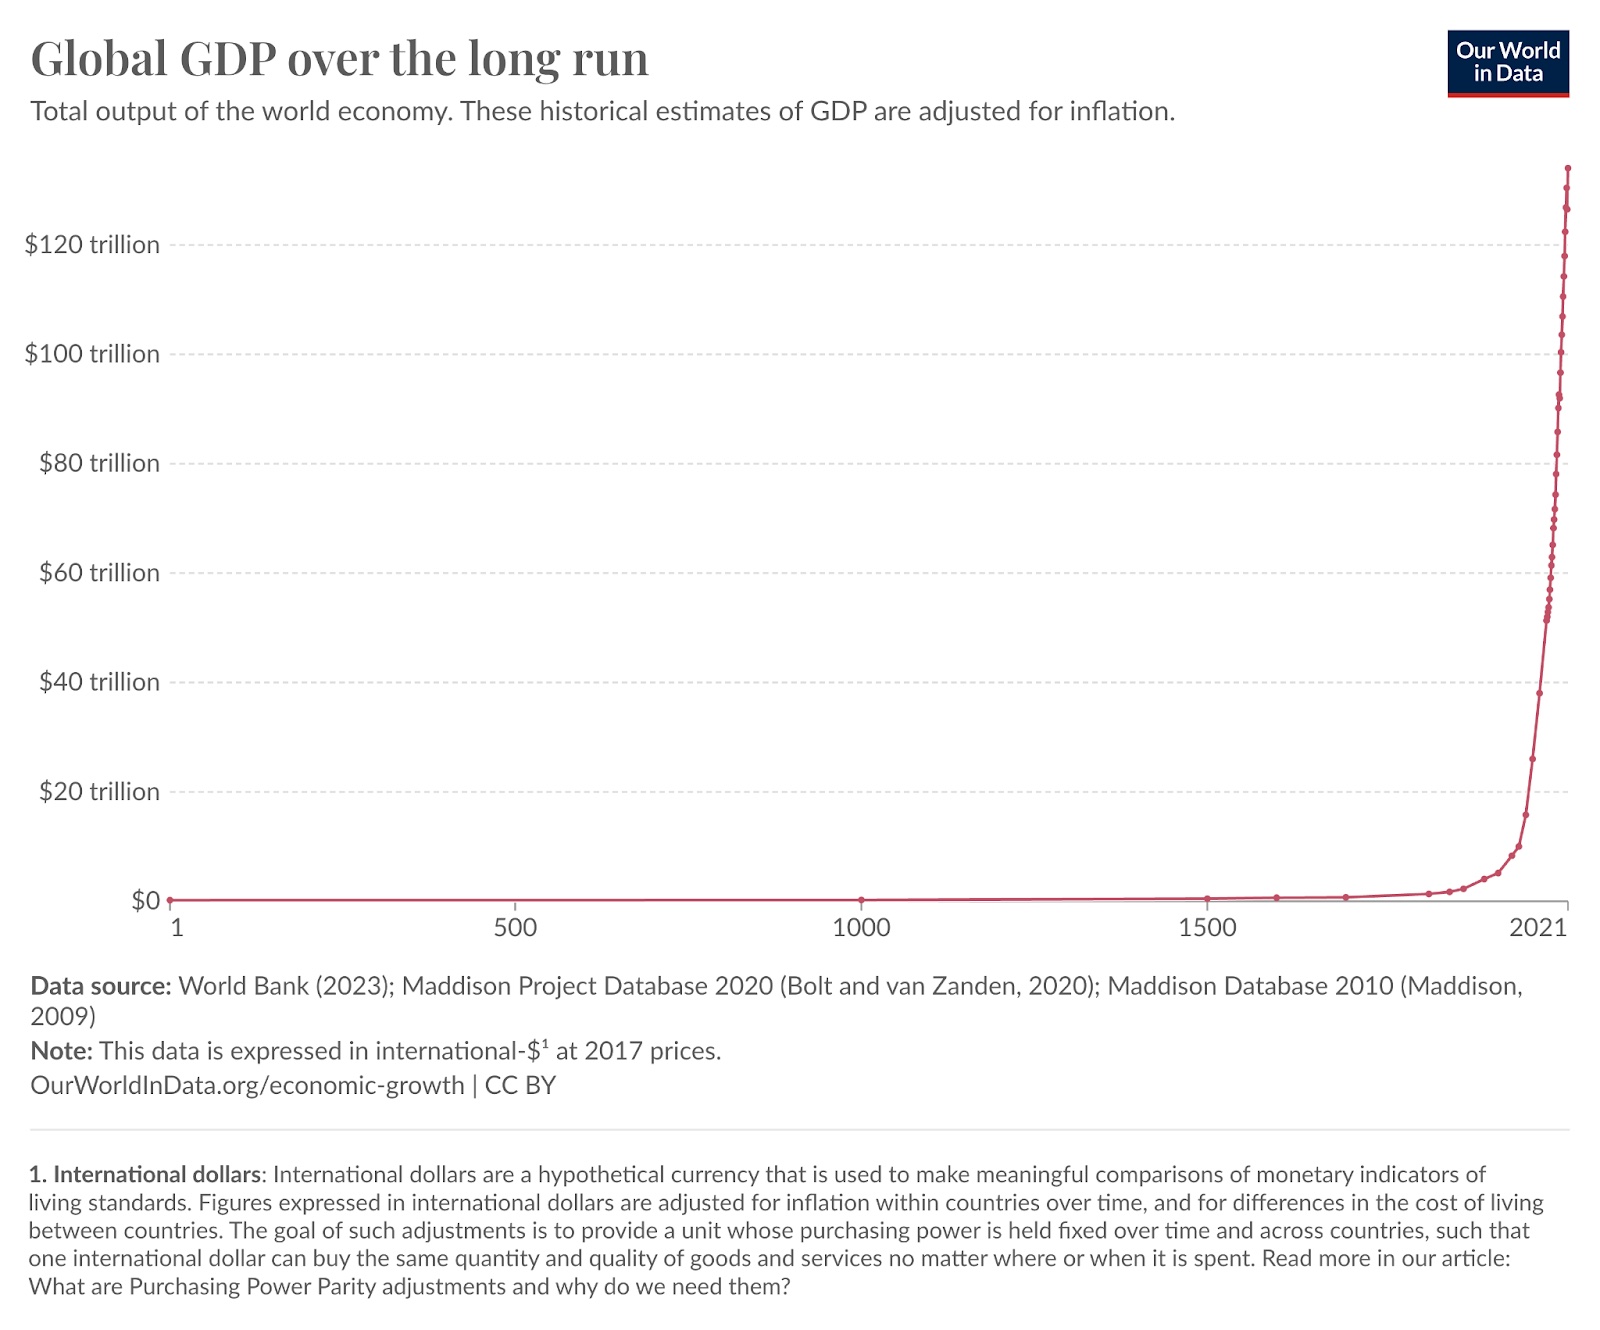 Line graph showing global GDP from year 1 to 2021. GDP remains relatively flat until a sharp increase starting around the 19th century, reaching over $125 trillion by 2021.